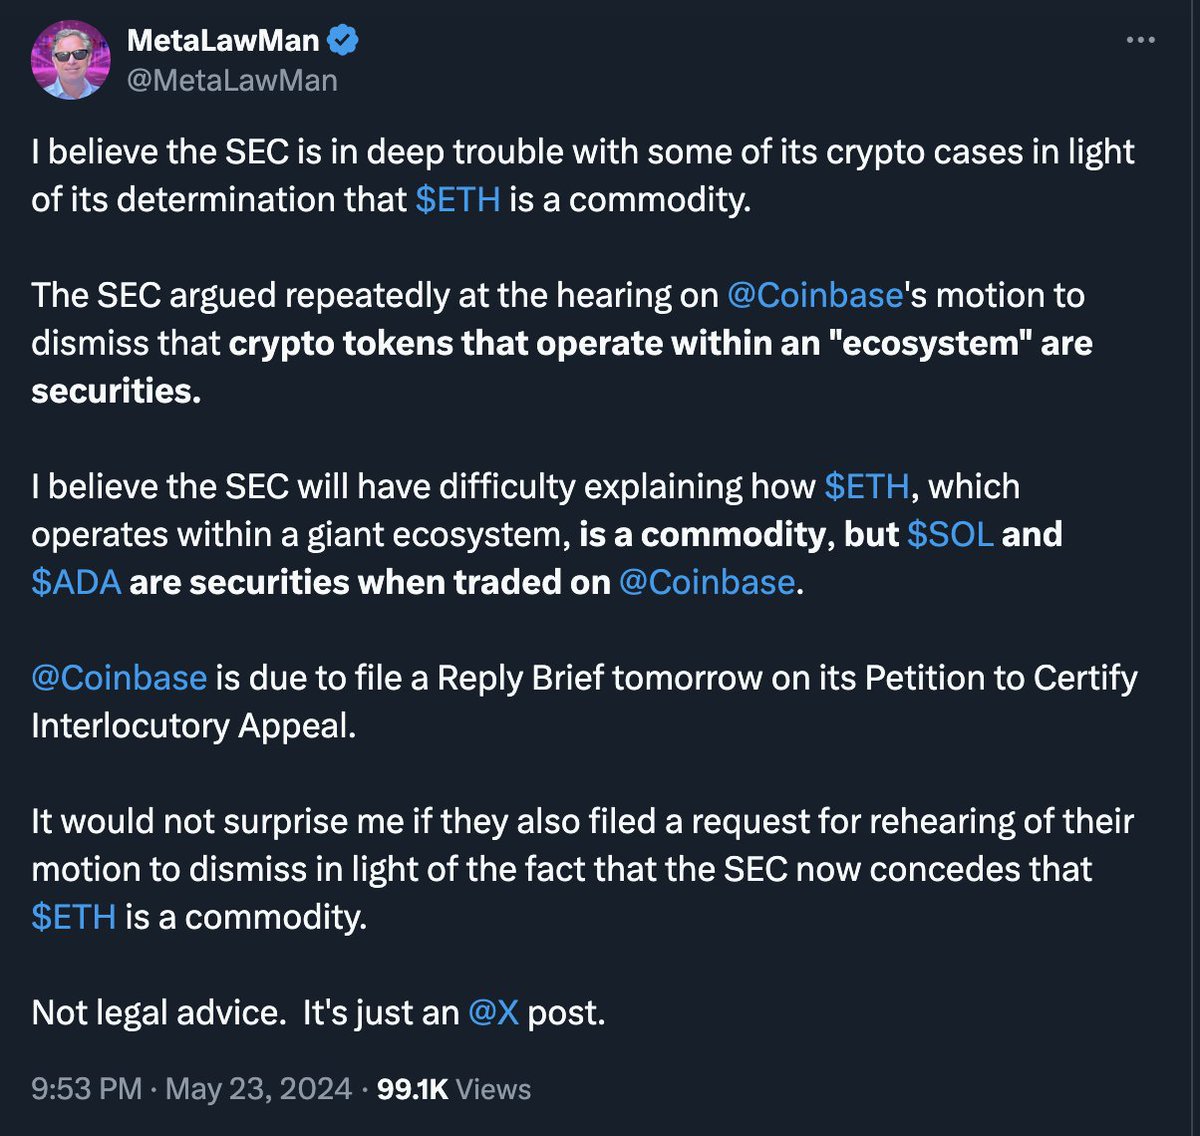 THE SEC'S ACCIDENTAL GREENLIGHT FOR $SOL AND $XRP ETFS? - Crypto lawyer James Murphy, aka MetaLawMan, asserts that the SEC’s approval of Ethereum ETFs undermines its stance in ongoing lawsuits against crypto firms, solidifying ETH’s status as a commodity. - The approval of